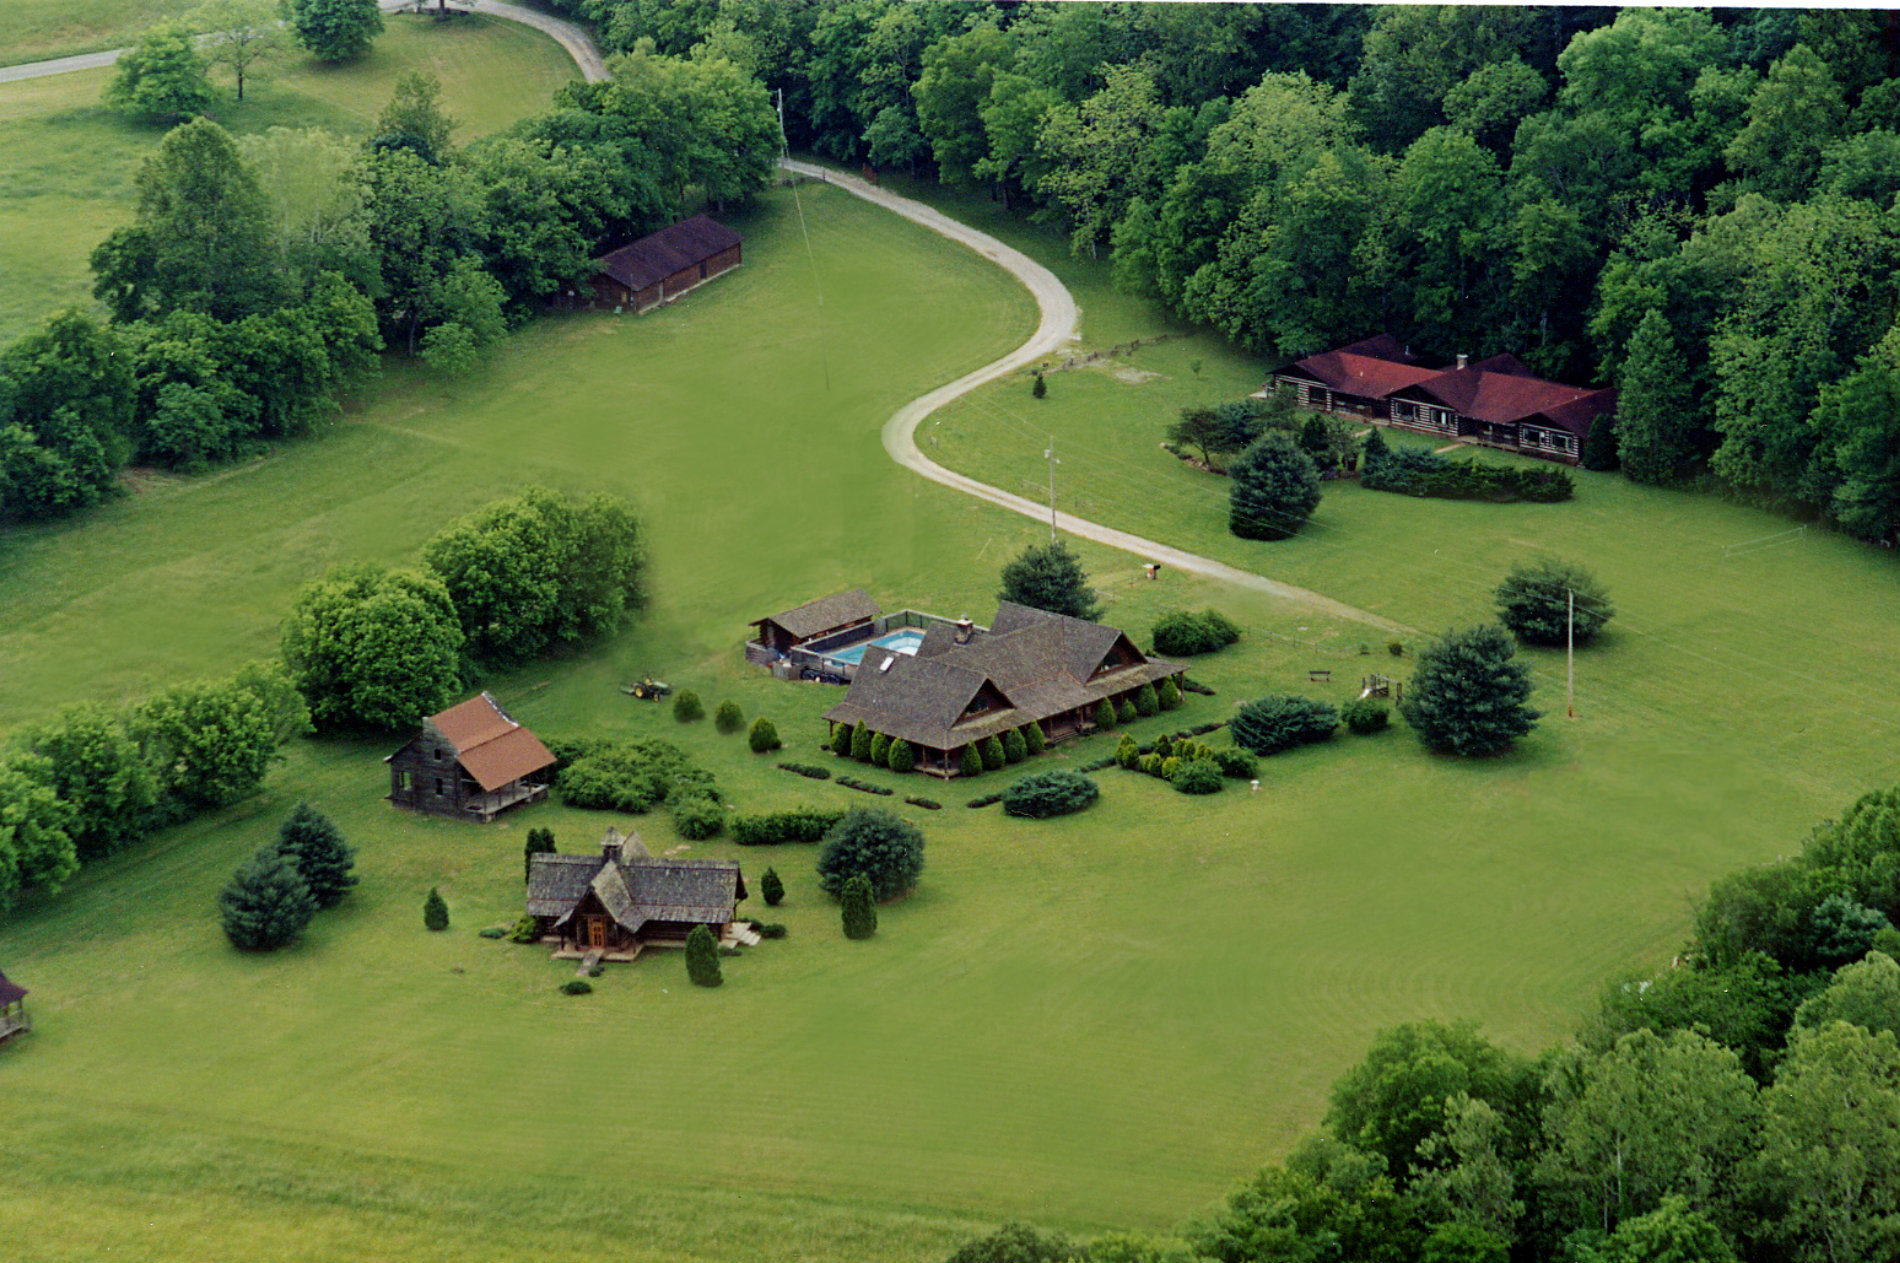 Ariel view of large farm with barn and dirt road and lodge with green trees